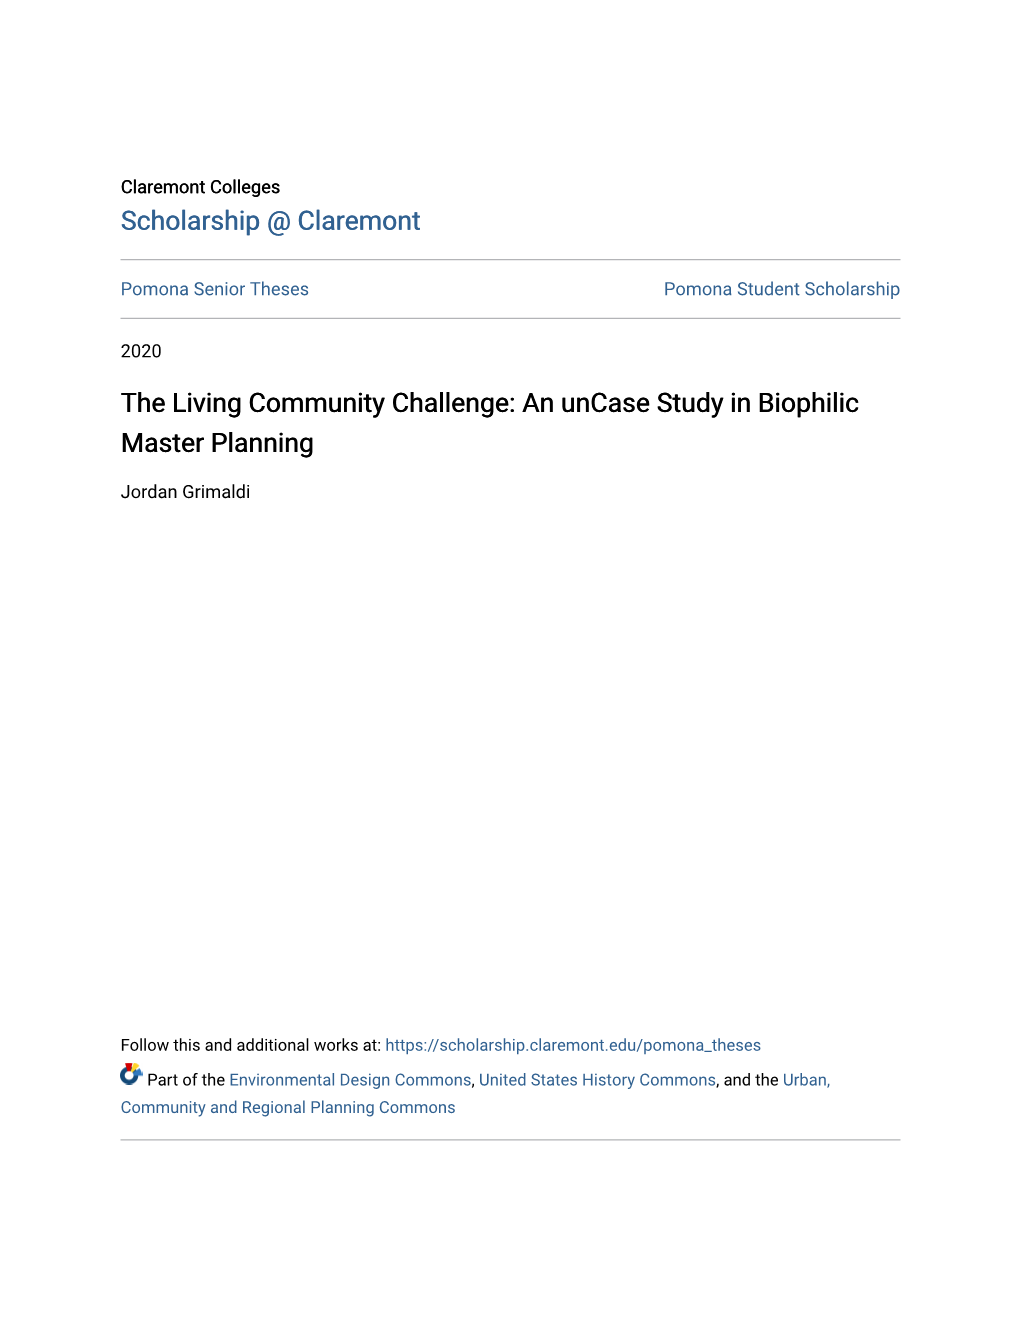 The Living Community Challenge: an Uncase Study in Biophilic Master Planning